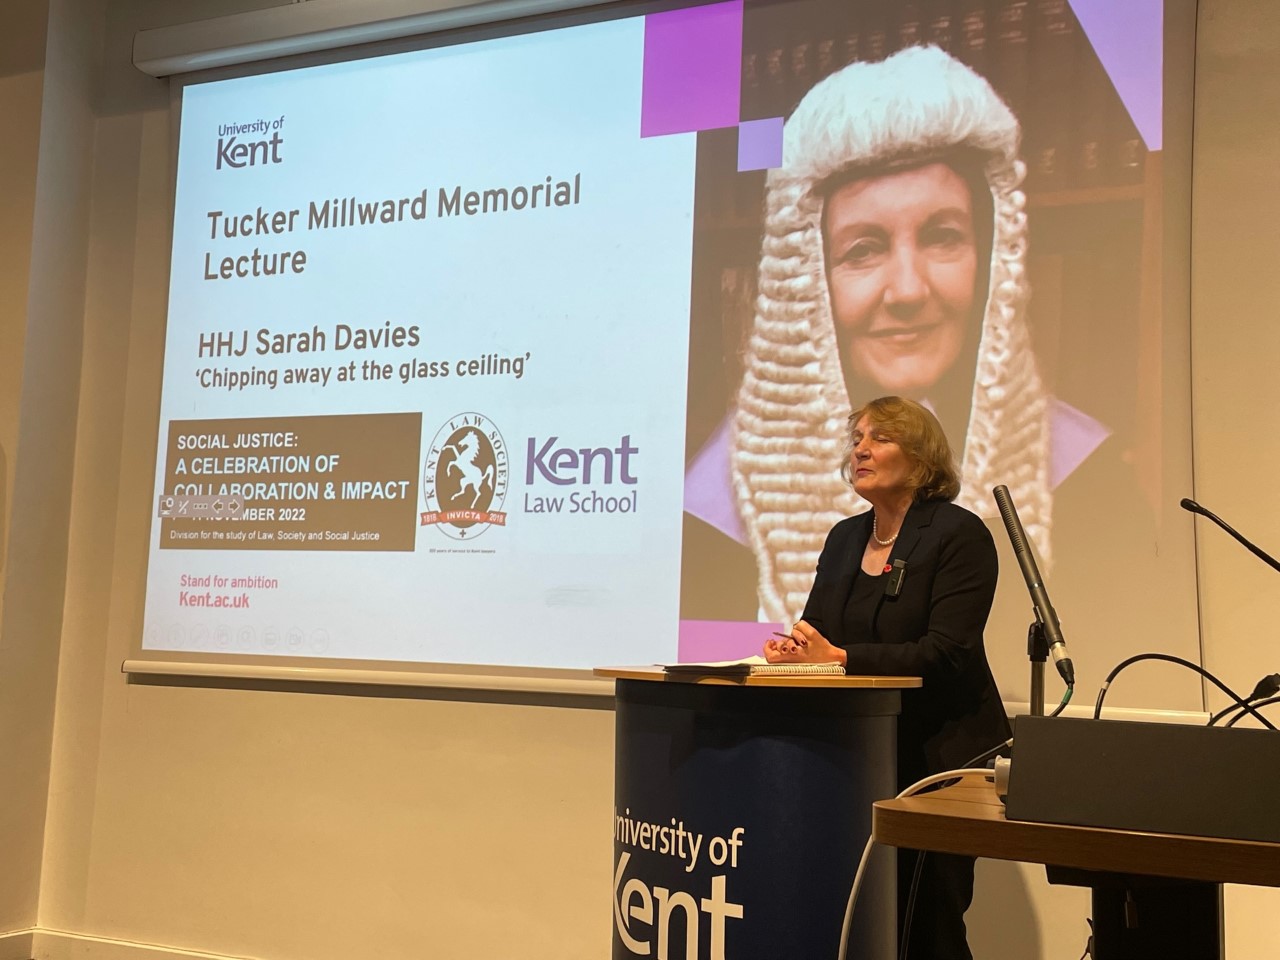 A photo from the Tucker Millward Memorial Lecture.